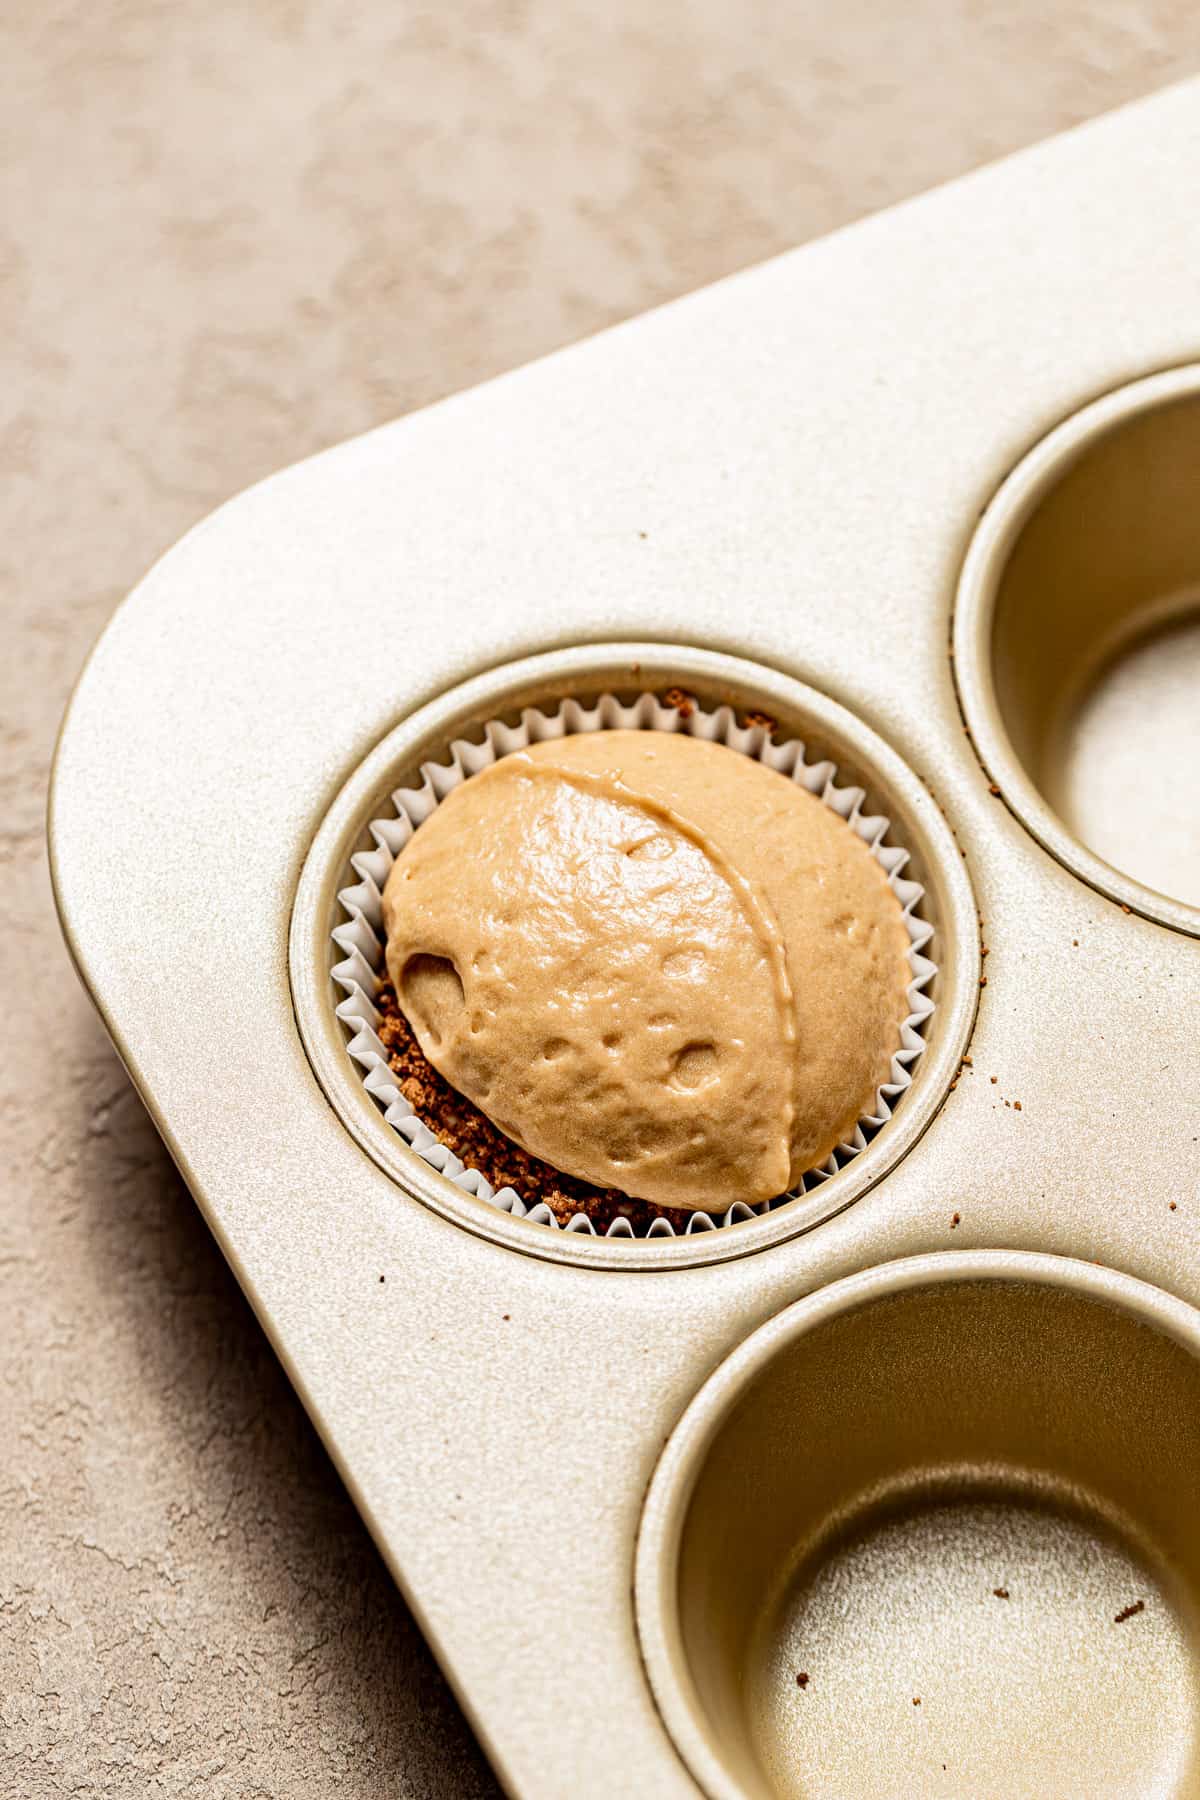 muffin batter scooped into paper liners in muffin tin.